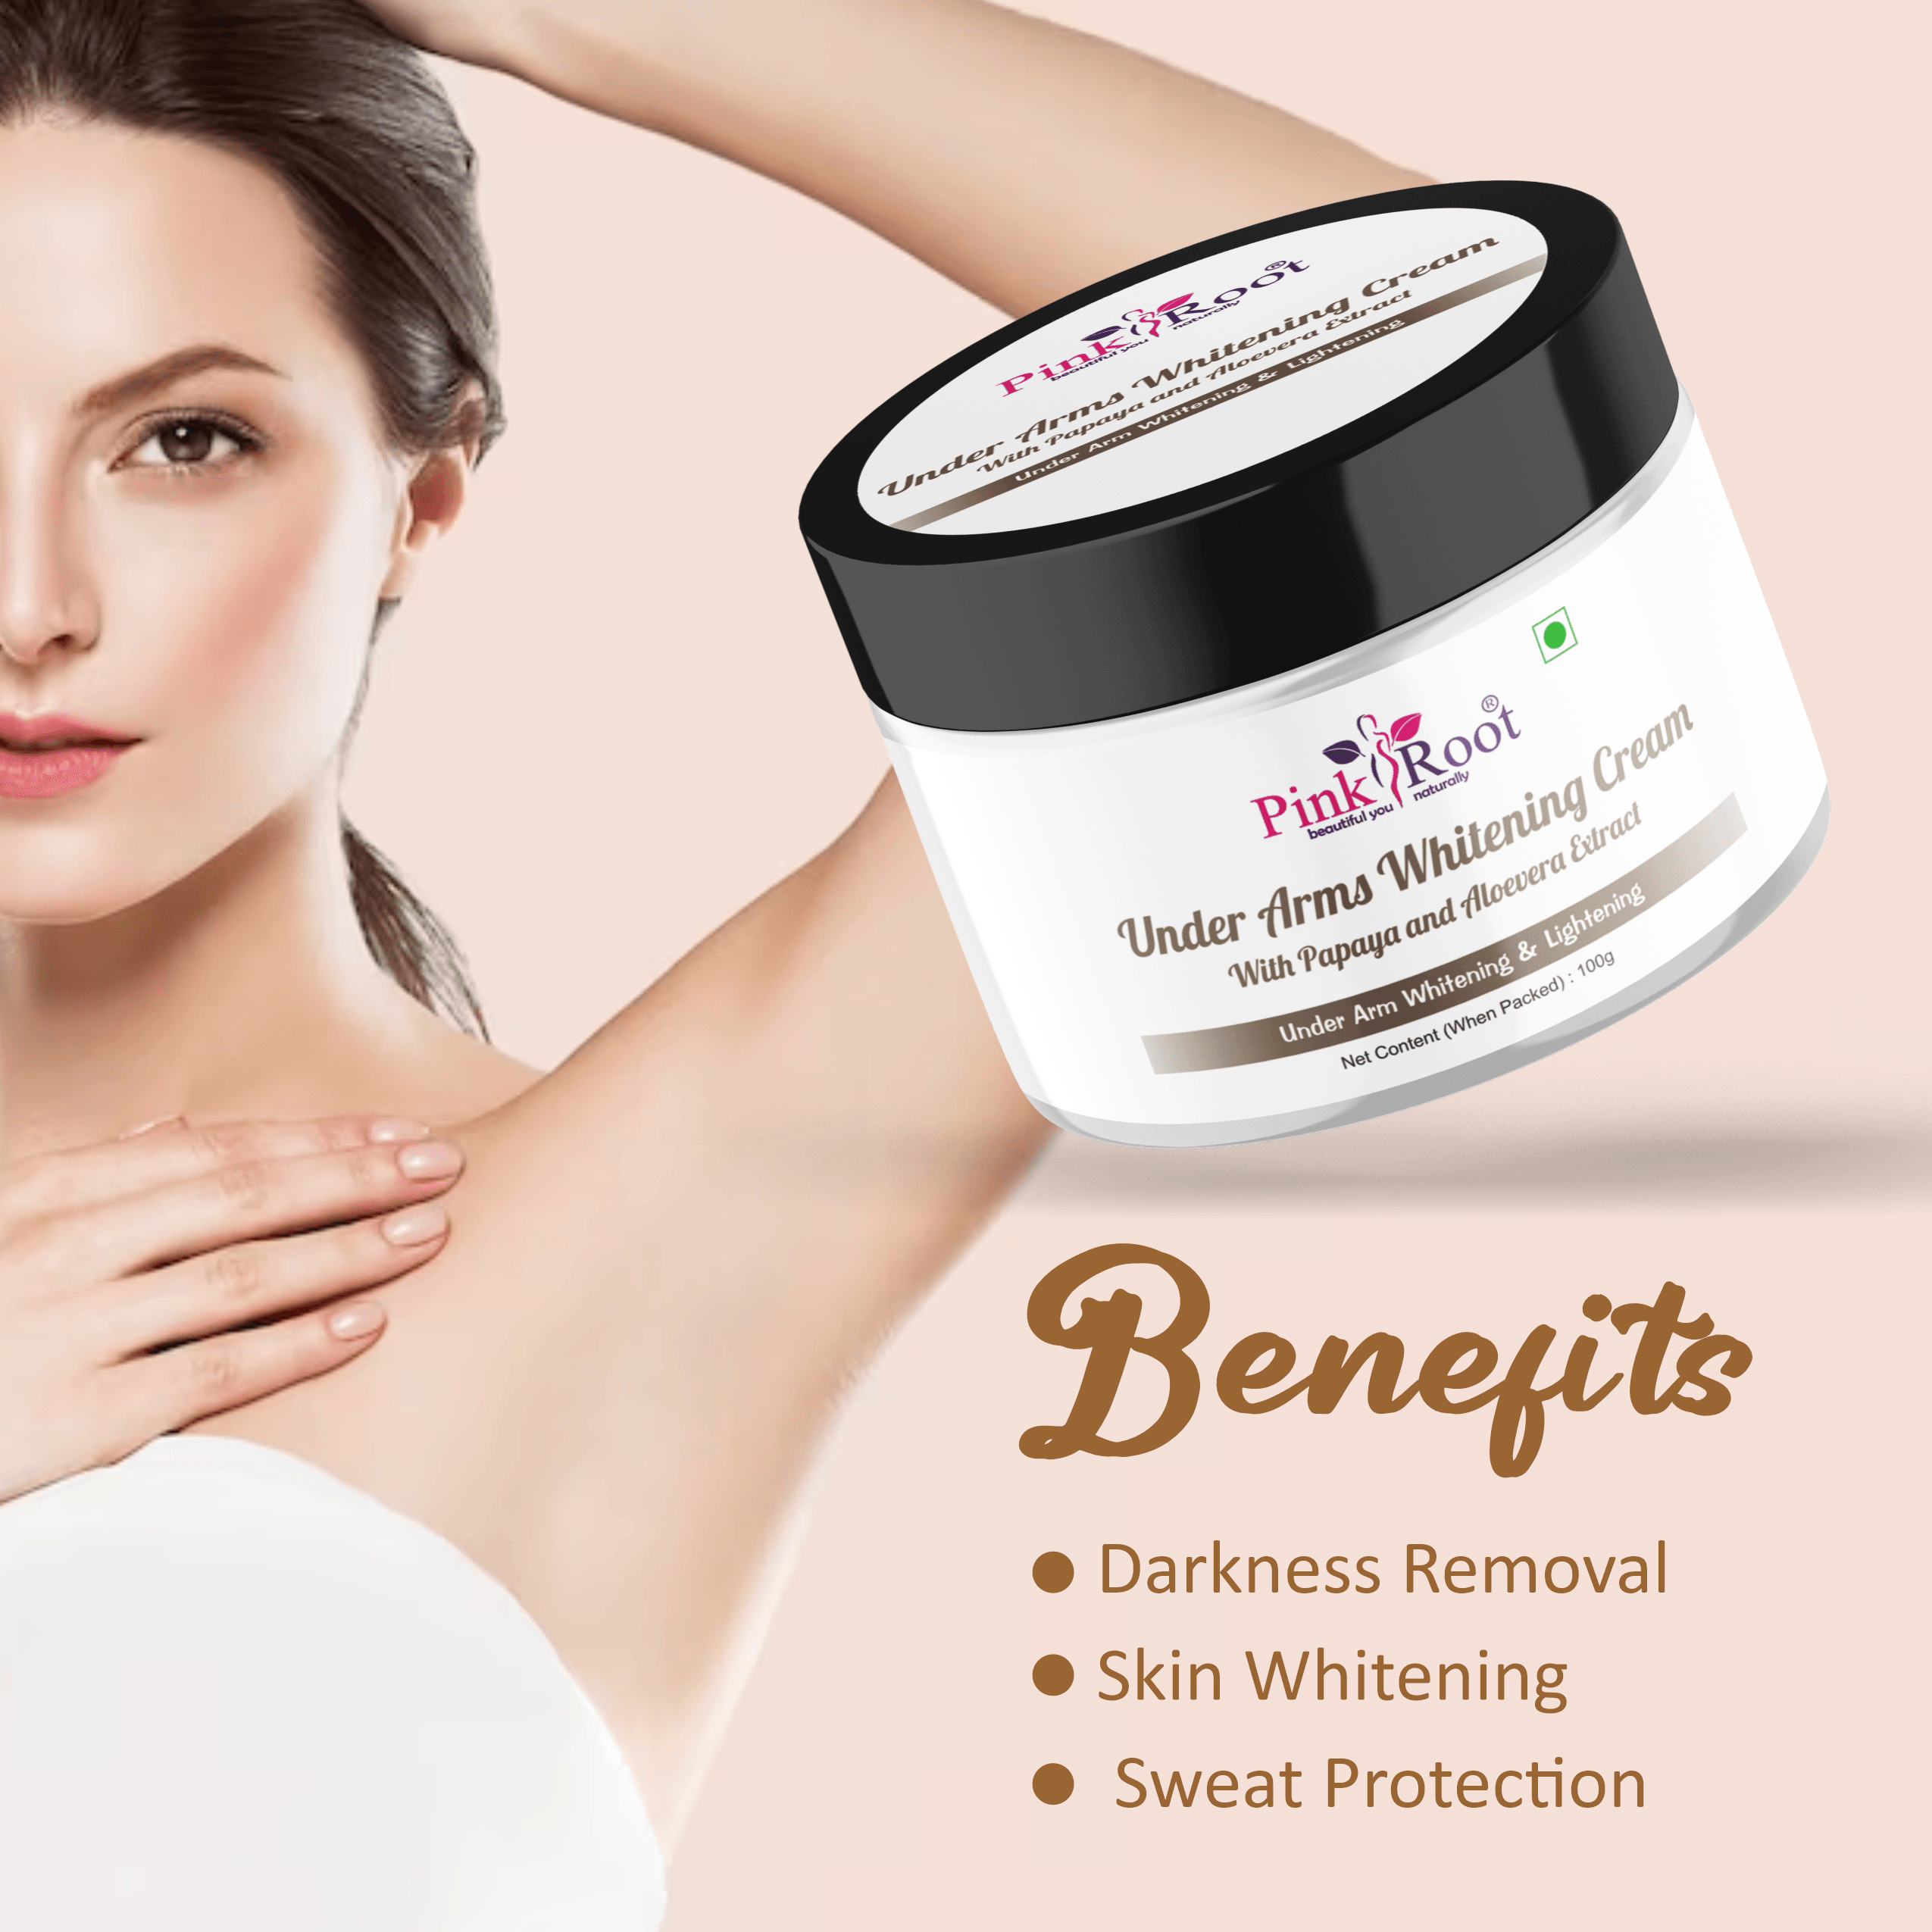 Under Arms Whitening Cream with Papaya & Aloevera Extract 100gm - Pink Root